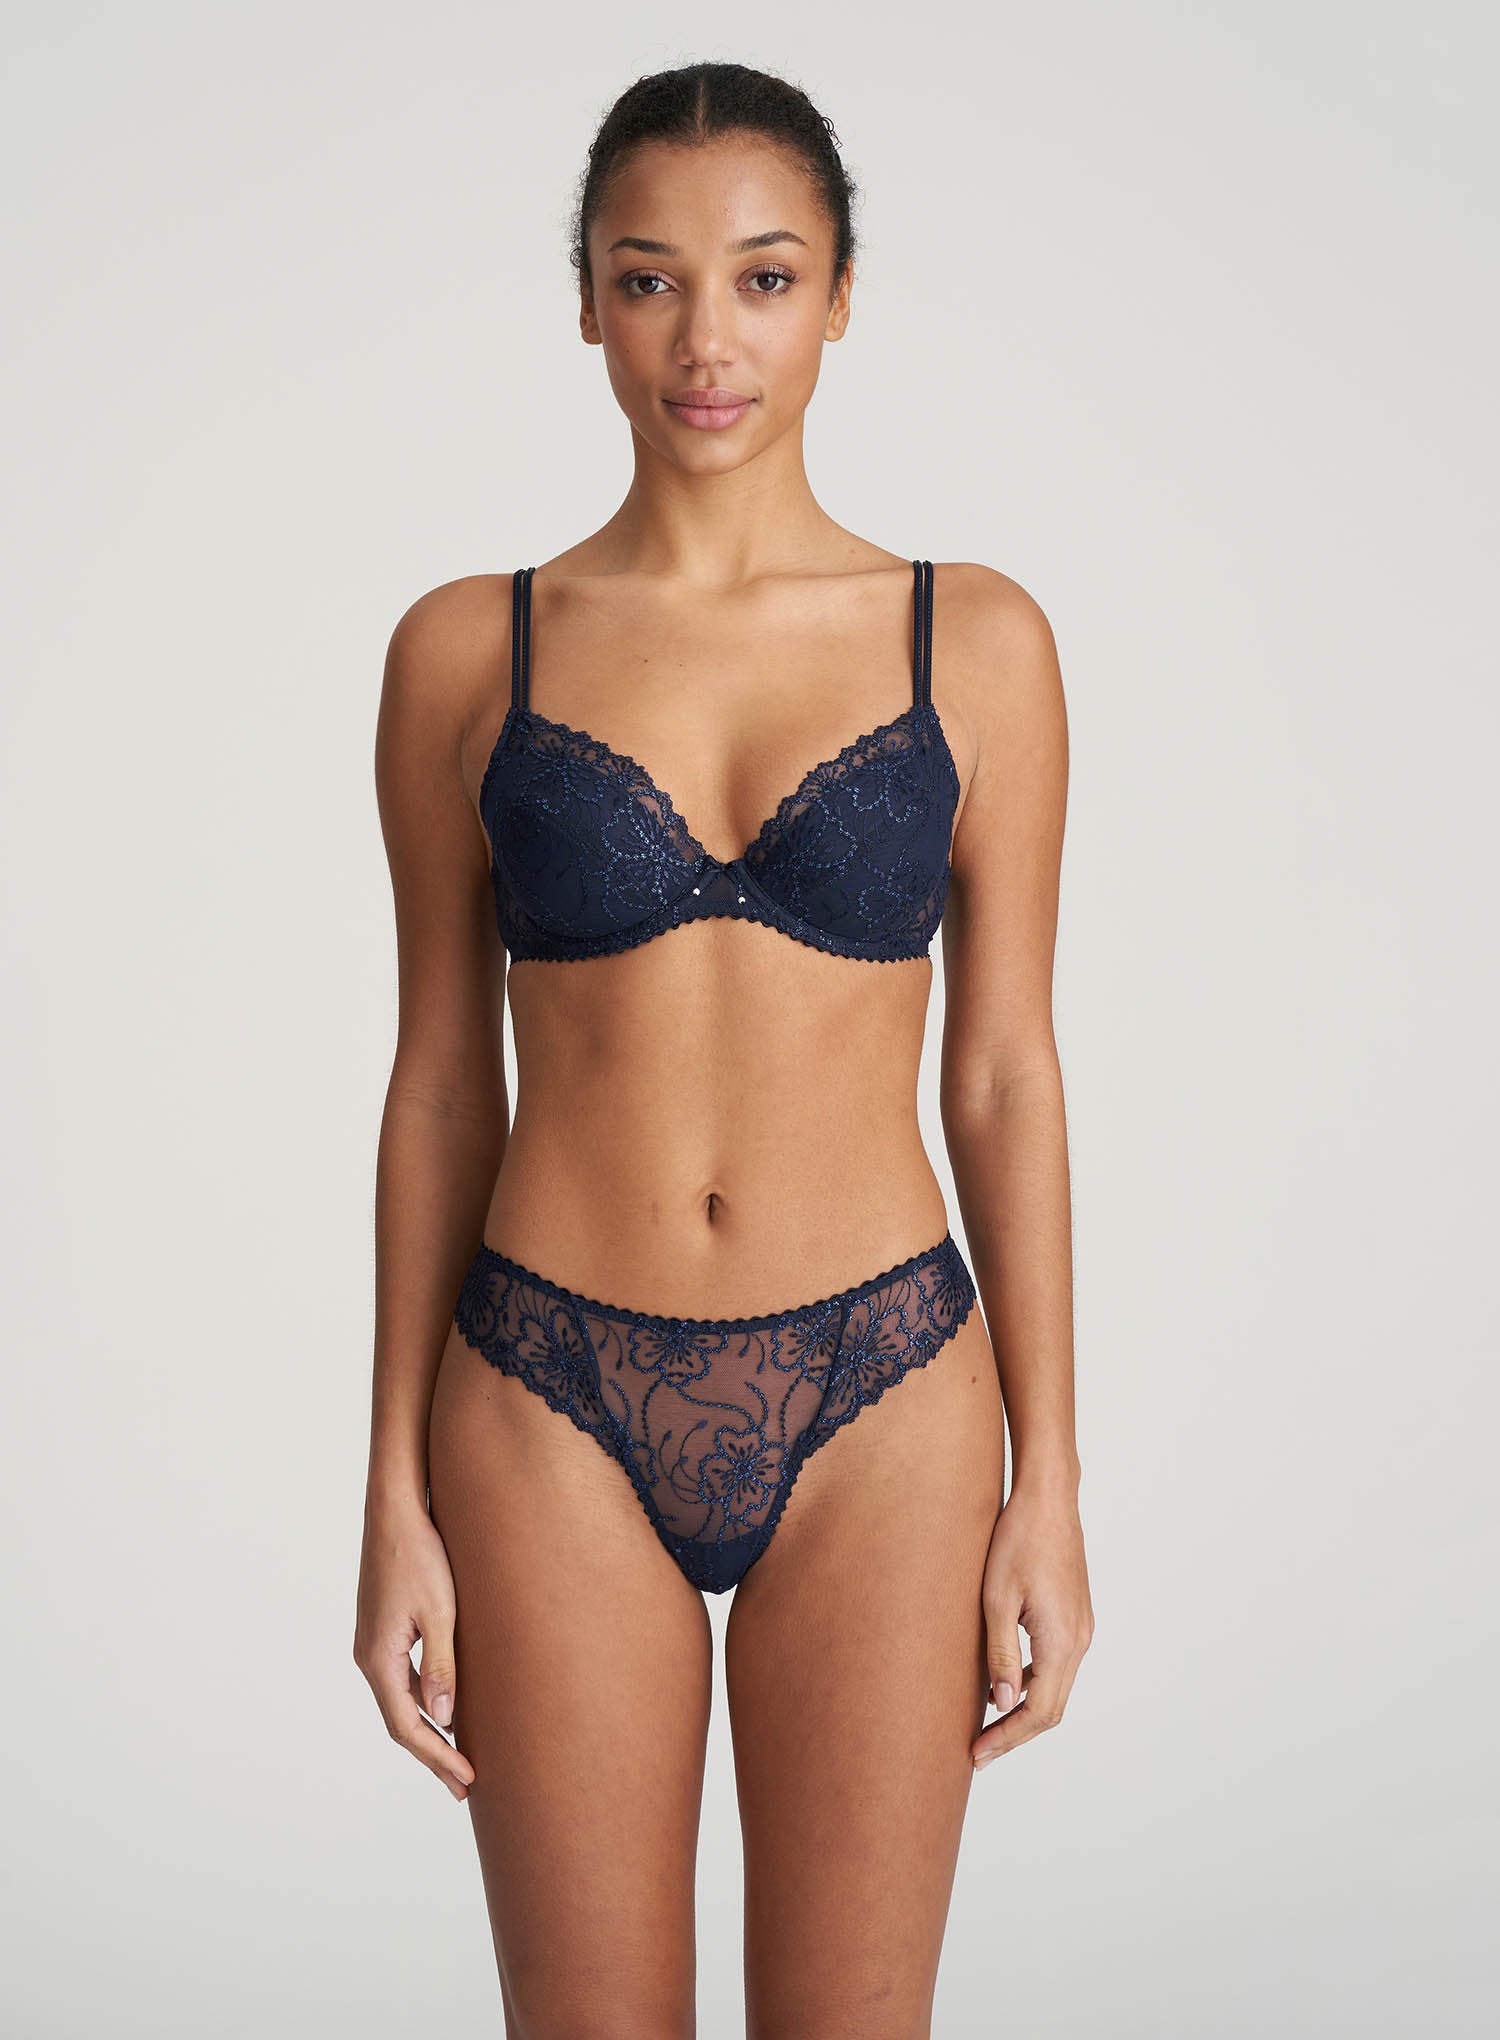 Marie Jo JANE natural push-up bra removable pads